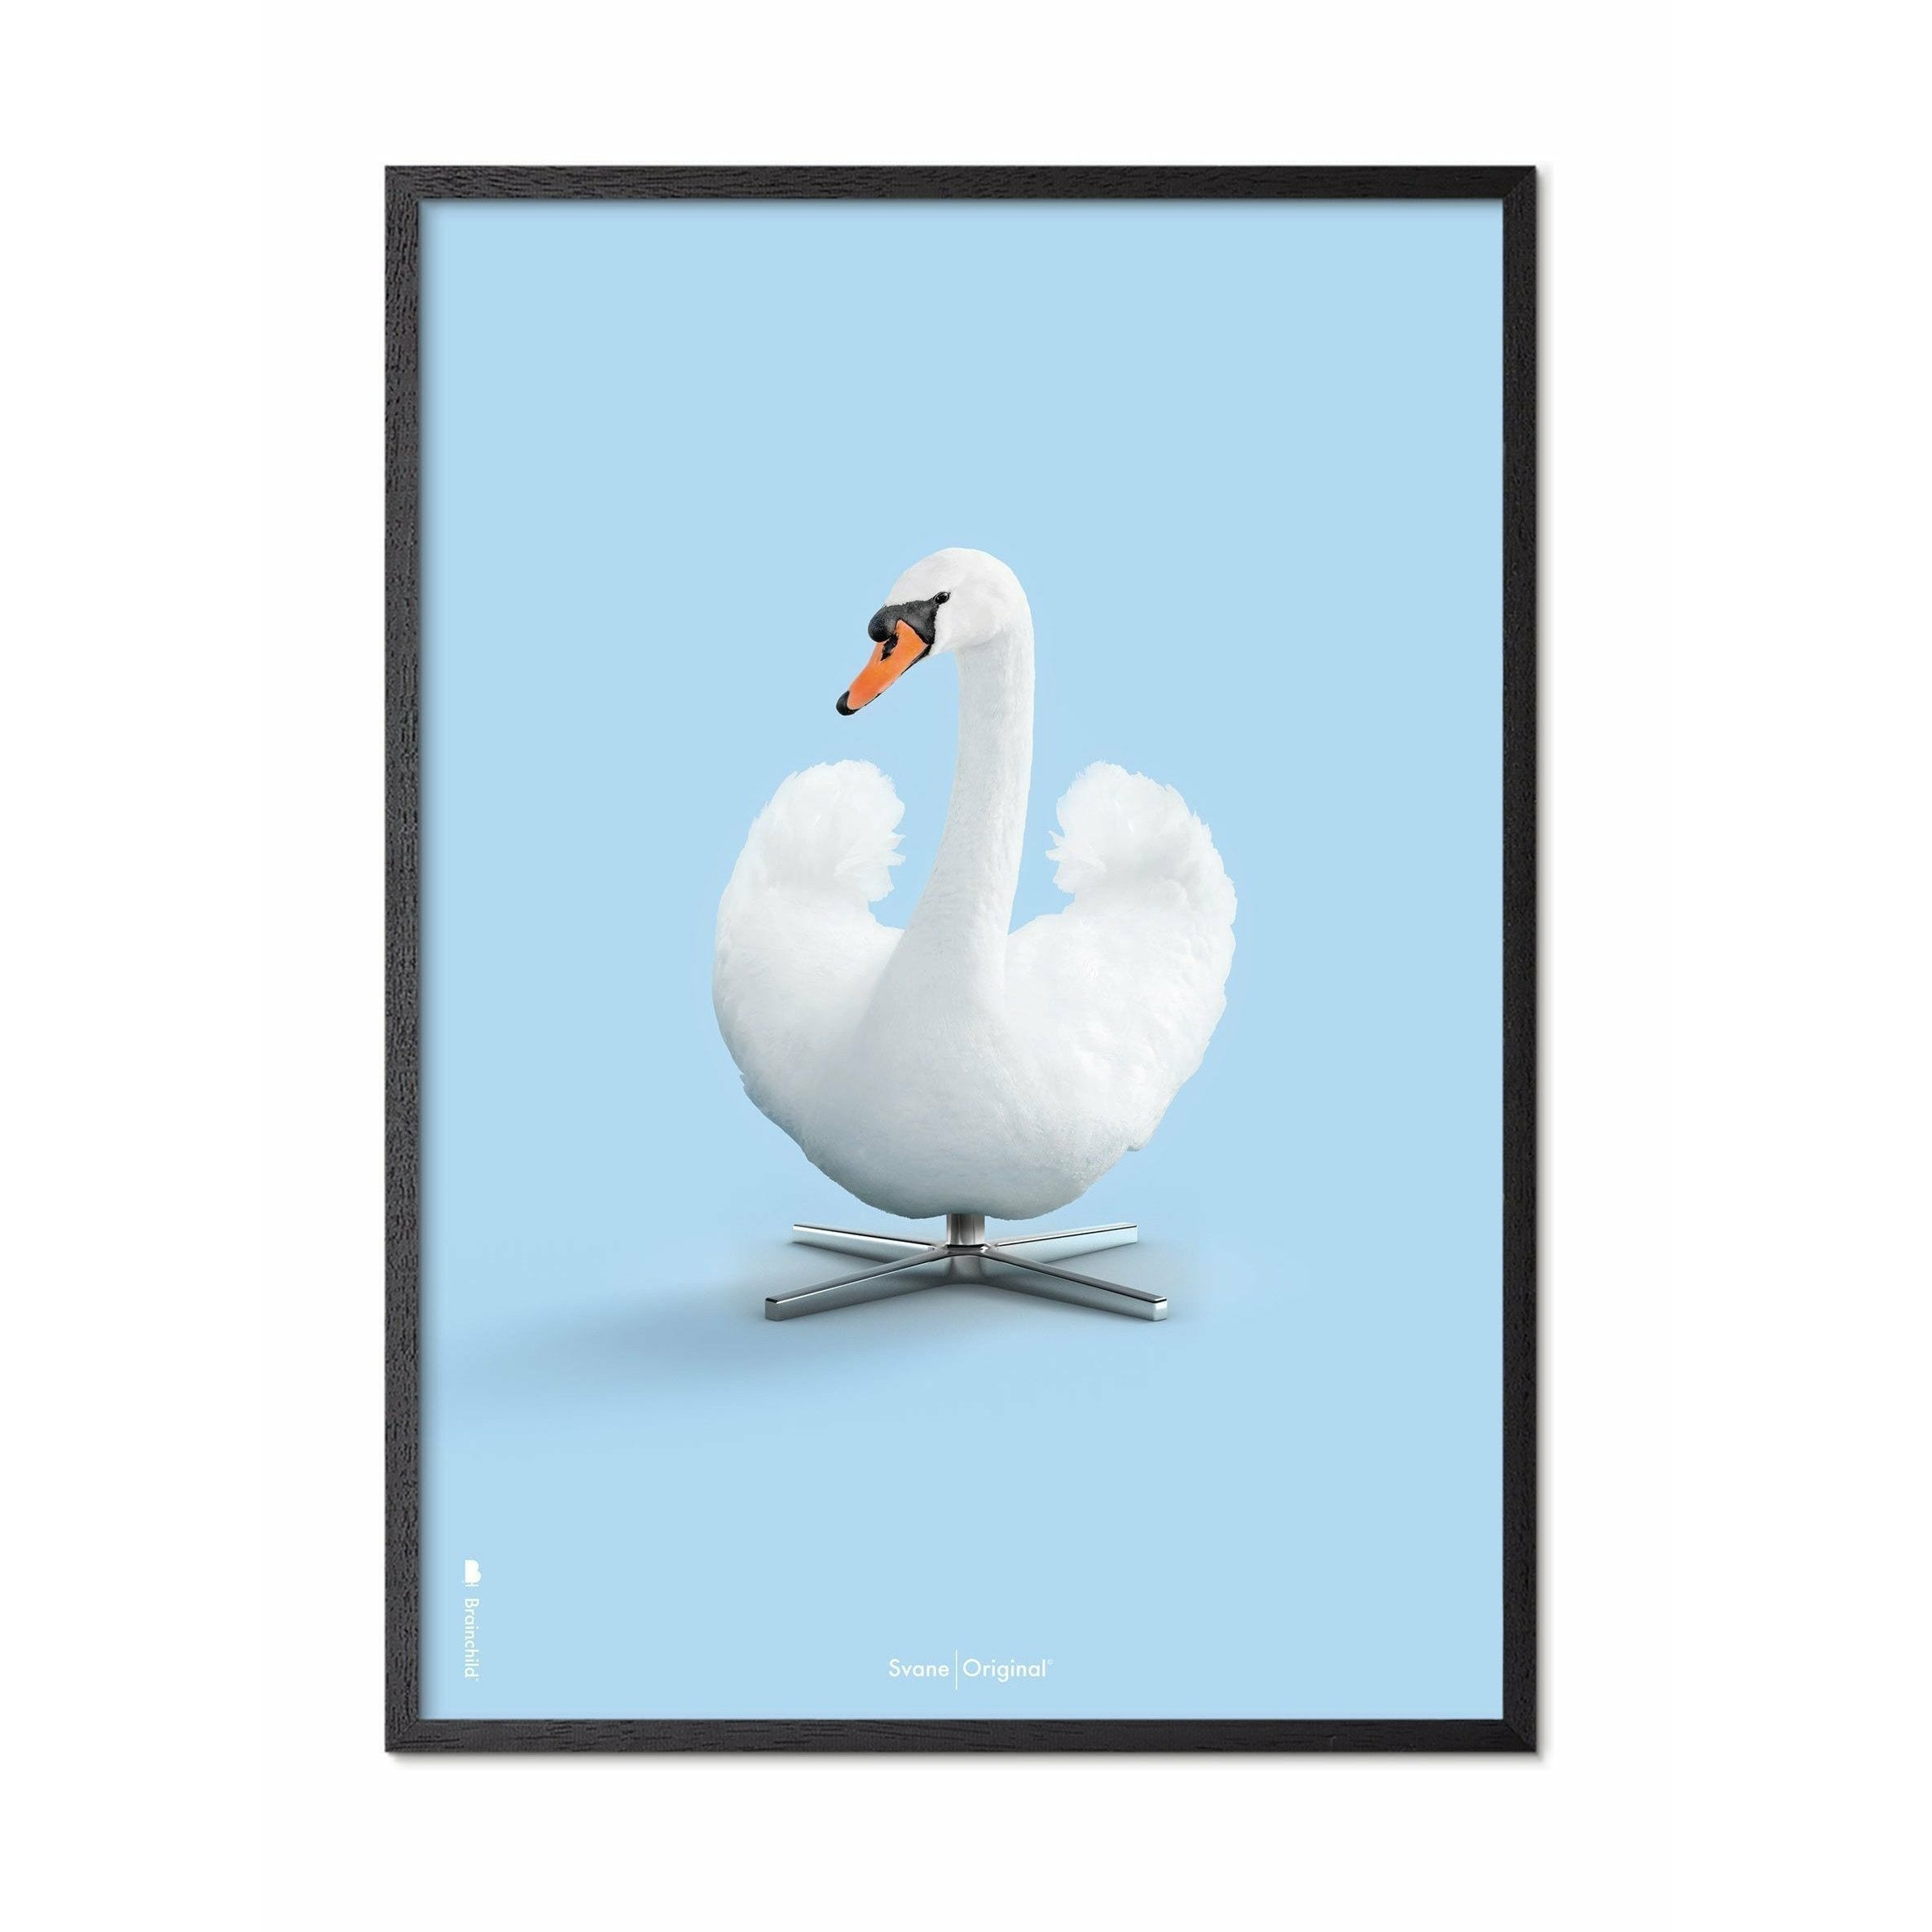 Brainchild Swan Classic Poster, Frame In Black Lacquered Wood 70 X100 Cm, Light Blue Background